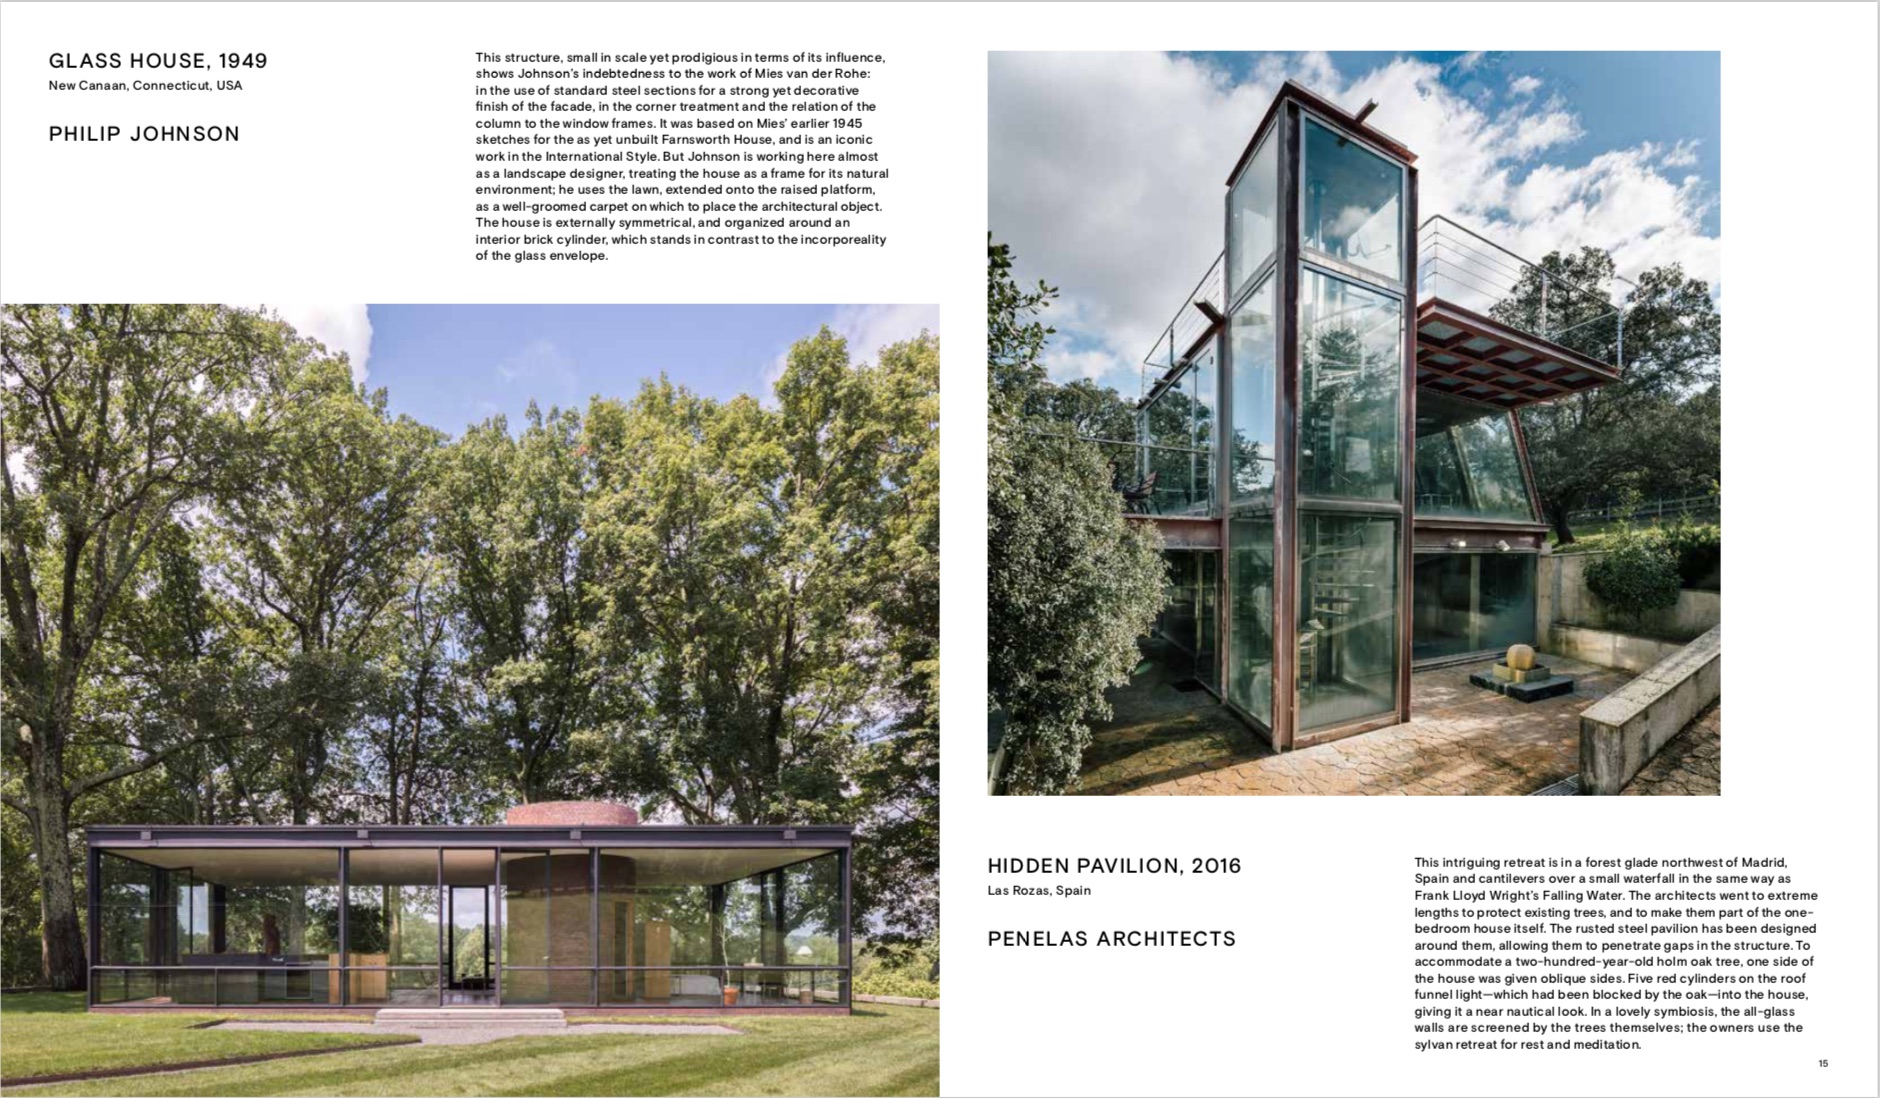 By Phaidon Editors from Houses: Extraordinary Living copyright Phaidon 2019